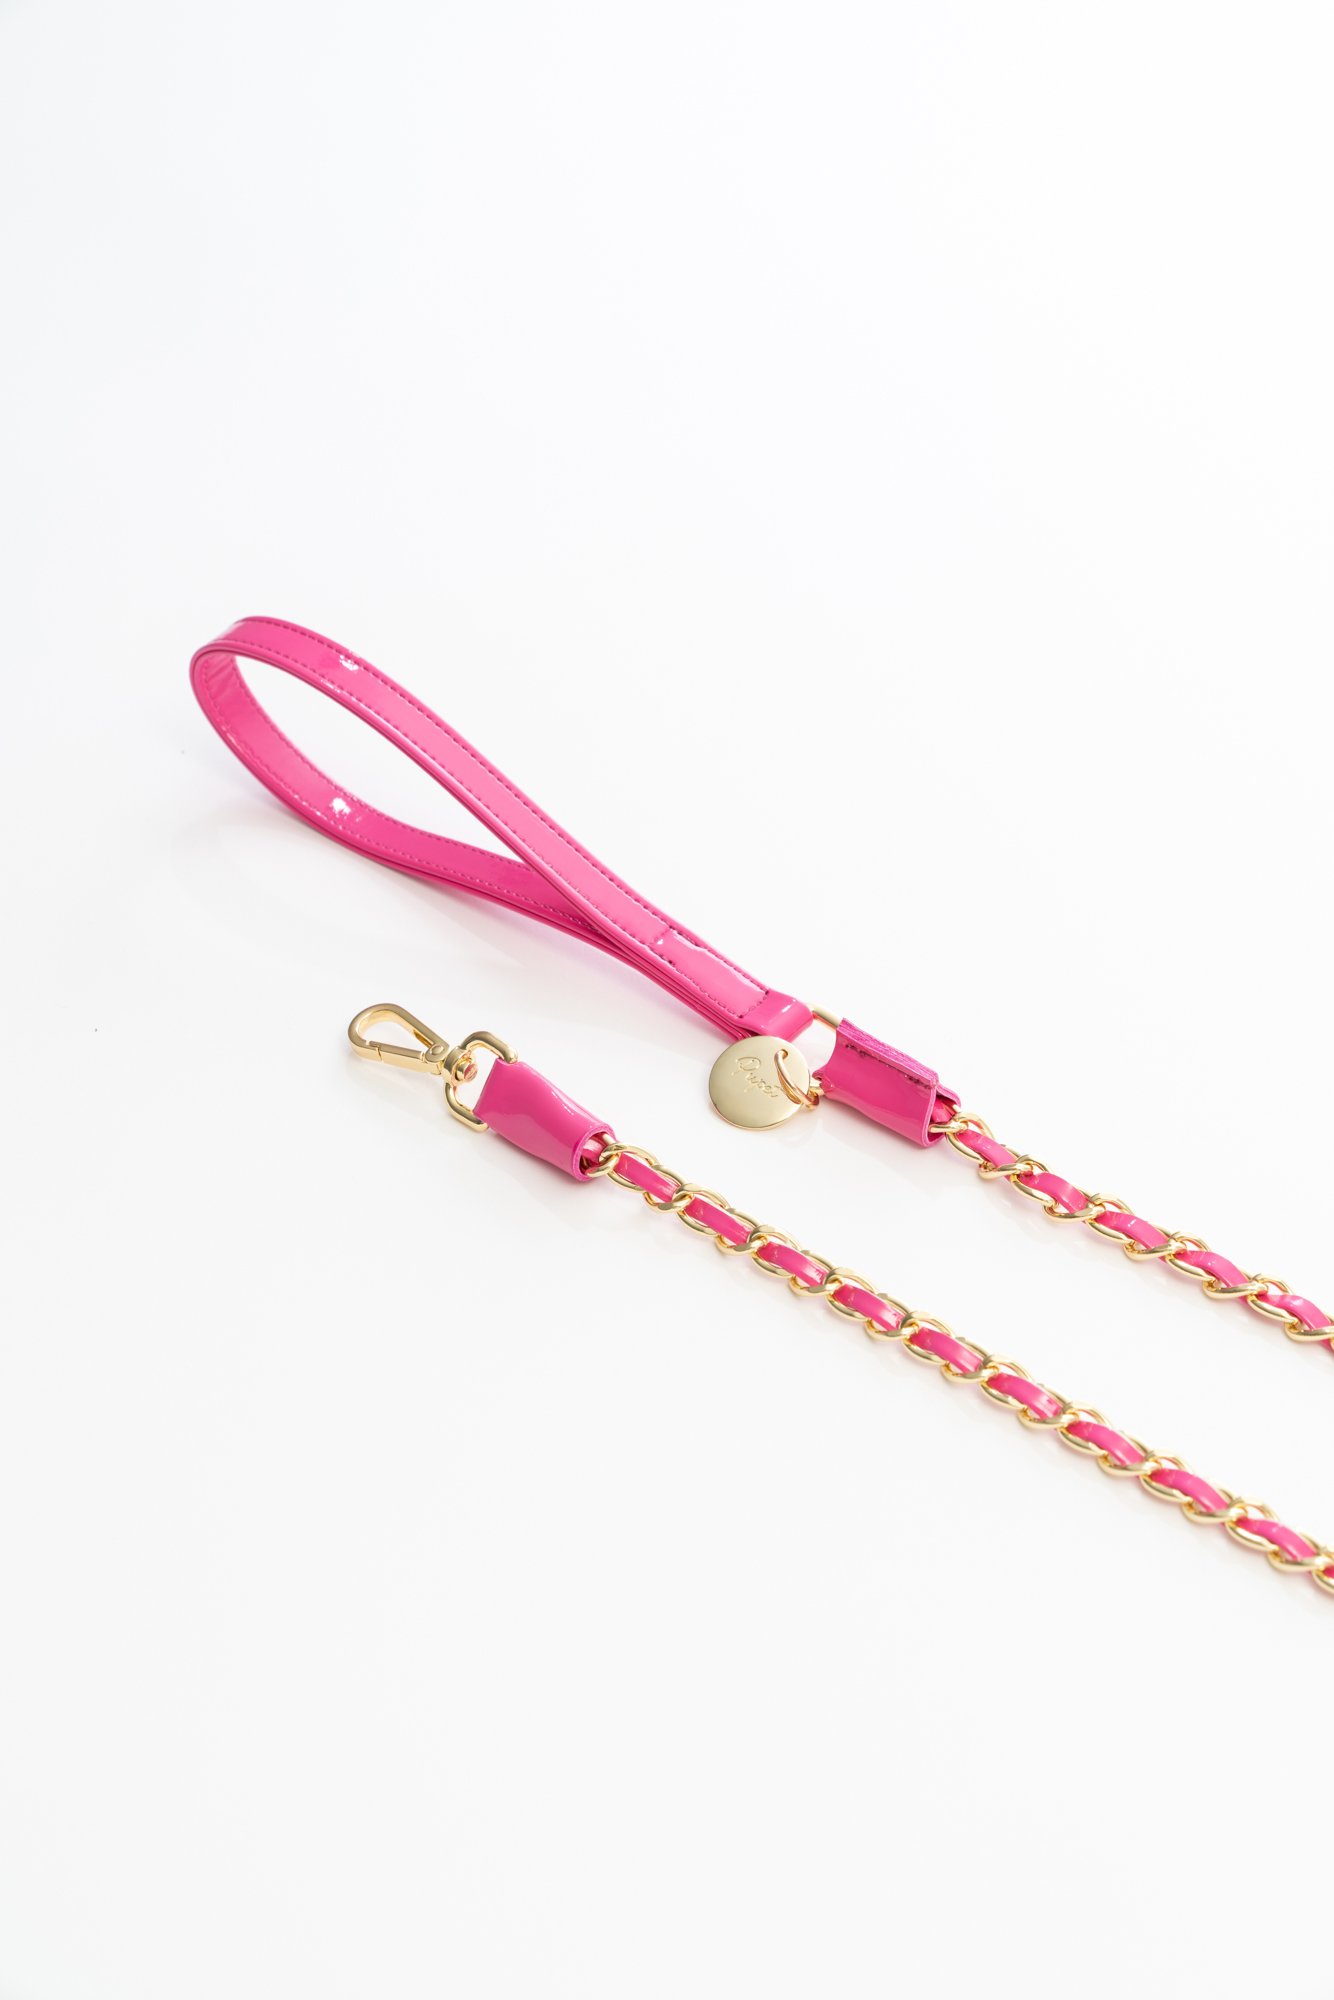 PATENT LEATHER LEASH WITH GOLDEN CHAIN